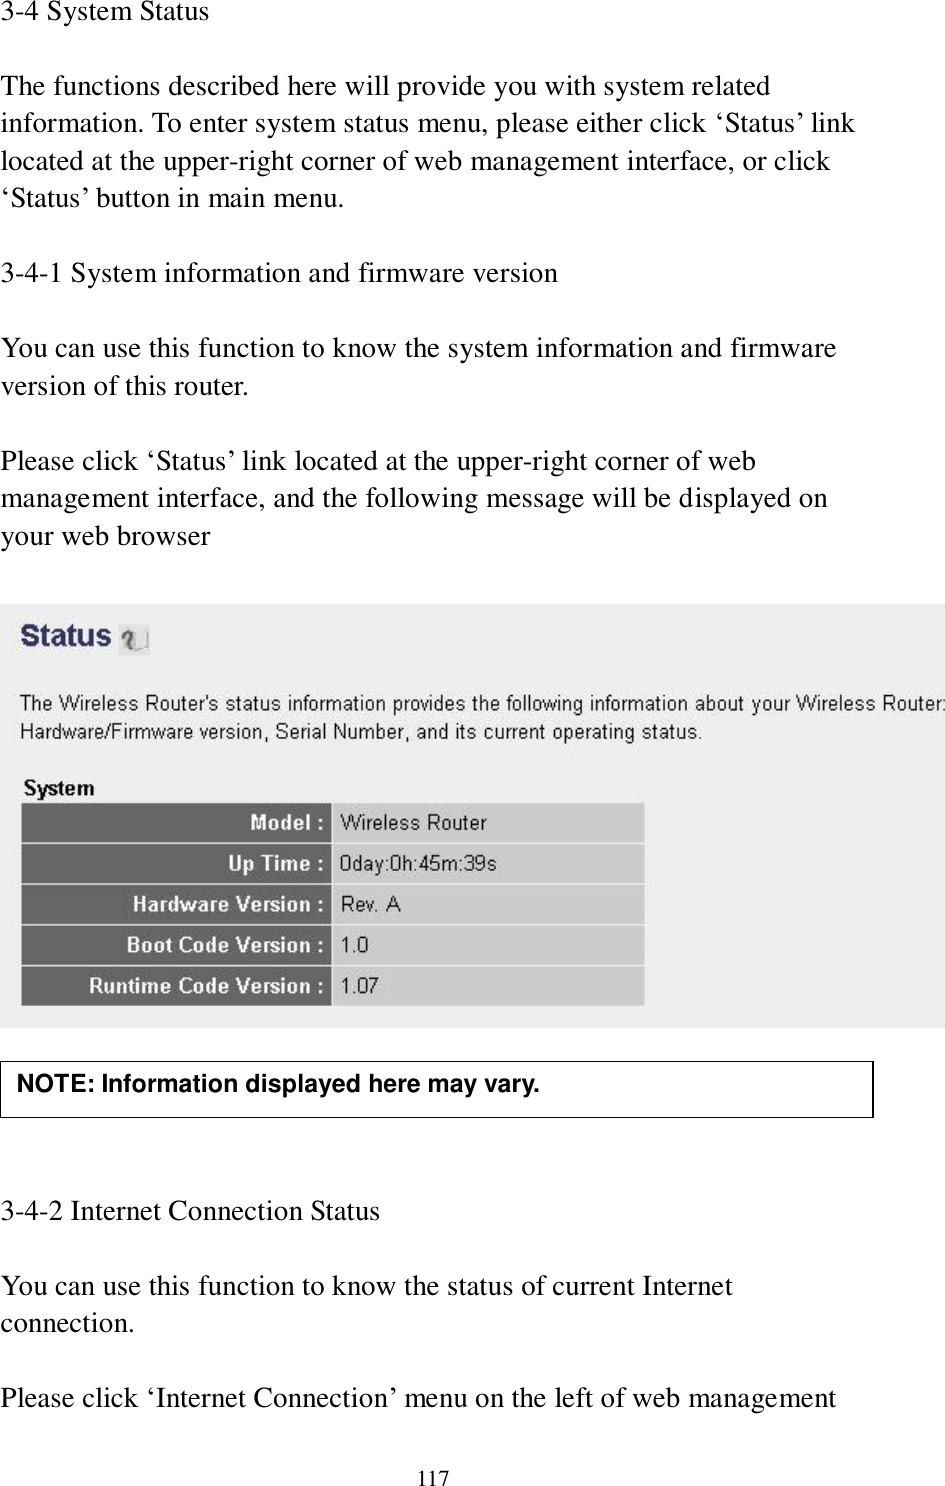 117 3-4 System Status  The functions described here will provide you with system related information. To enter system status menu, please either click „Status‟ link located at the upper-right corner of web management interface, or click „Status‟ button in main menu.  3-4-1 System information and firmware version  You can use this function to know the system information and firmware version of this router.  Please click „Status‟ link located at the upper-right corner of web management interface, and the following message will be displayed on your web browser       3-4-2 Internet Connection Status  You can use this function to know the status of current Internet connection.  Please click „Internet Connection‟ menu on the left of web management NOTE: Information displayed here may vary. 